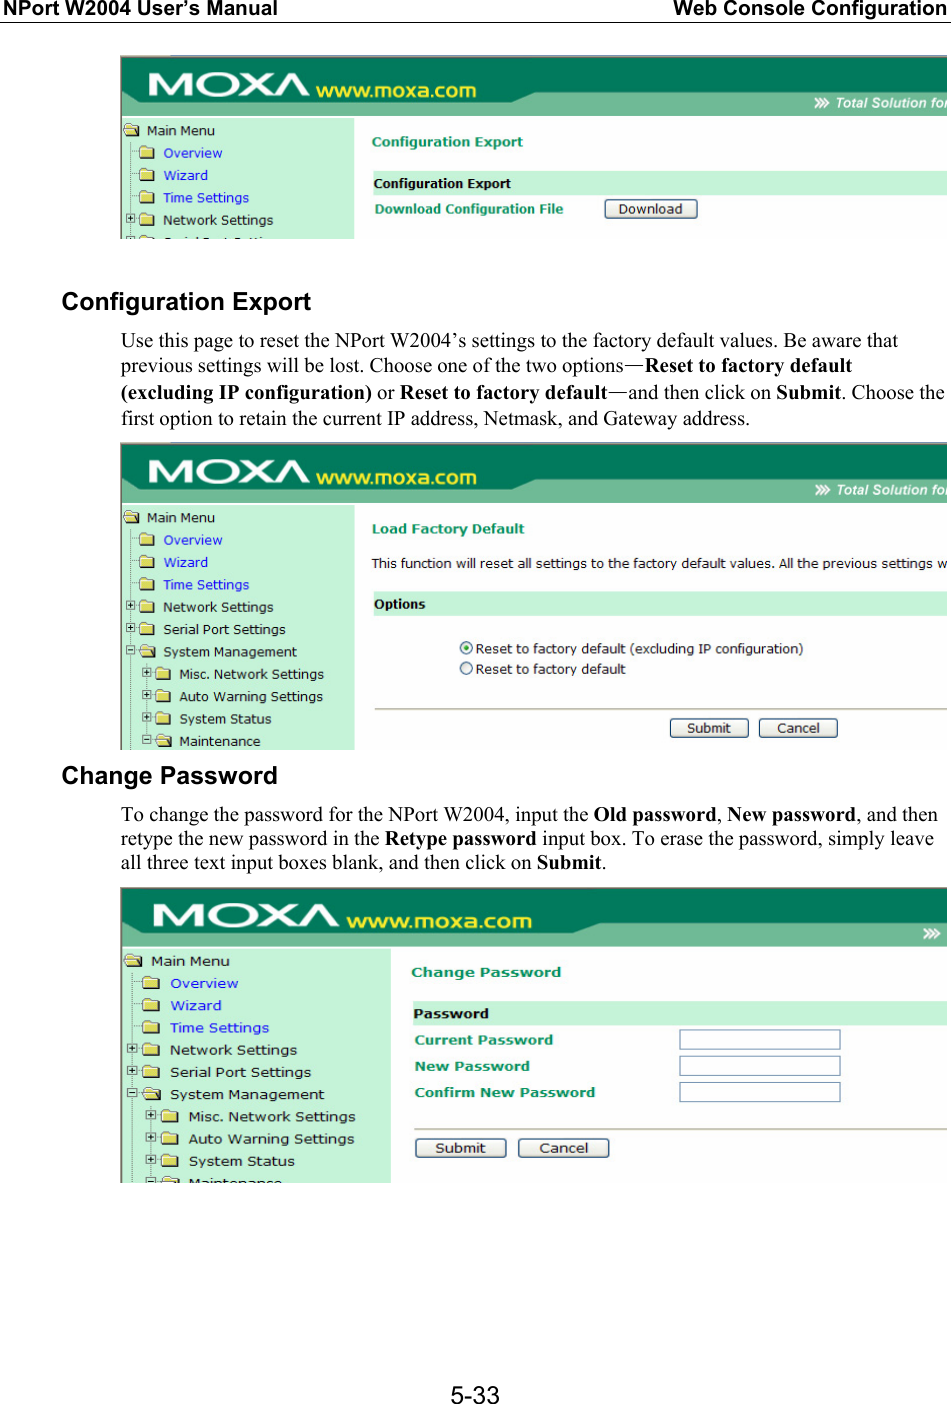 NPort W2004 User’s Manual  Web Console Configuration  5-33  Configuration Export Use this page to reset the NPort W2004’s settings to the factory default values. Be aware that previous settings will be lost. Choose one of the two options—Reset to factory default (excluding IP configuration) or Reset to factory default—and then click on Submit. Choose the first option to retain the current IP address, Netmask, and Gateway address.  Change Password To change the password for the NPort W2004, input the Old password, New password, and then retype the new password in the Retype password input box. To erase the password, simply leave all three text input boxes blank, and then click on Submit.        